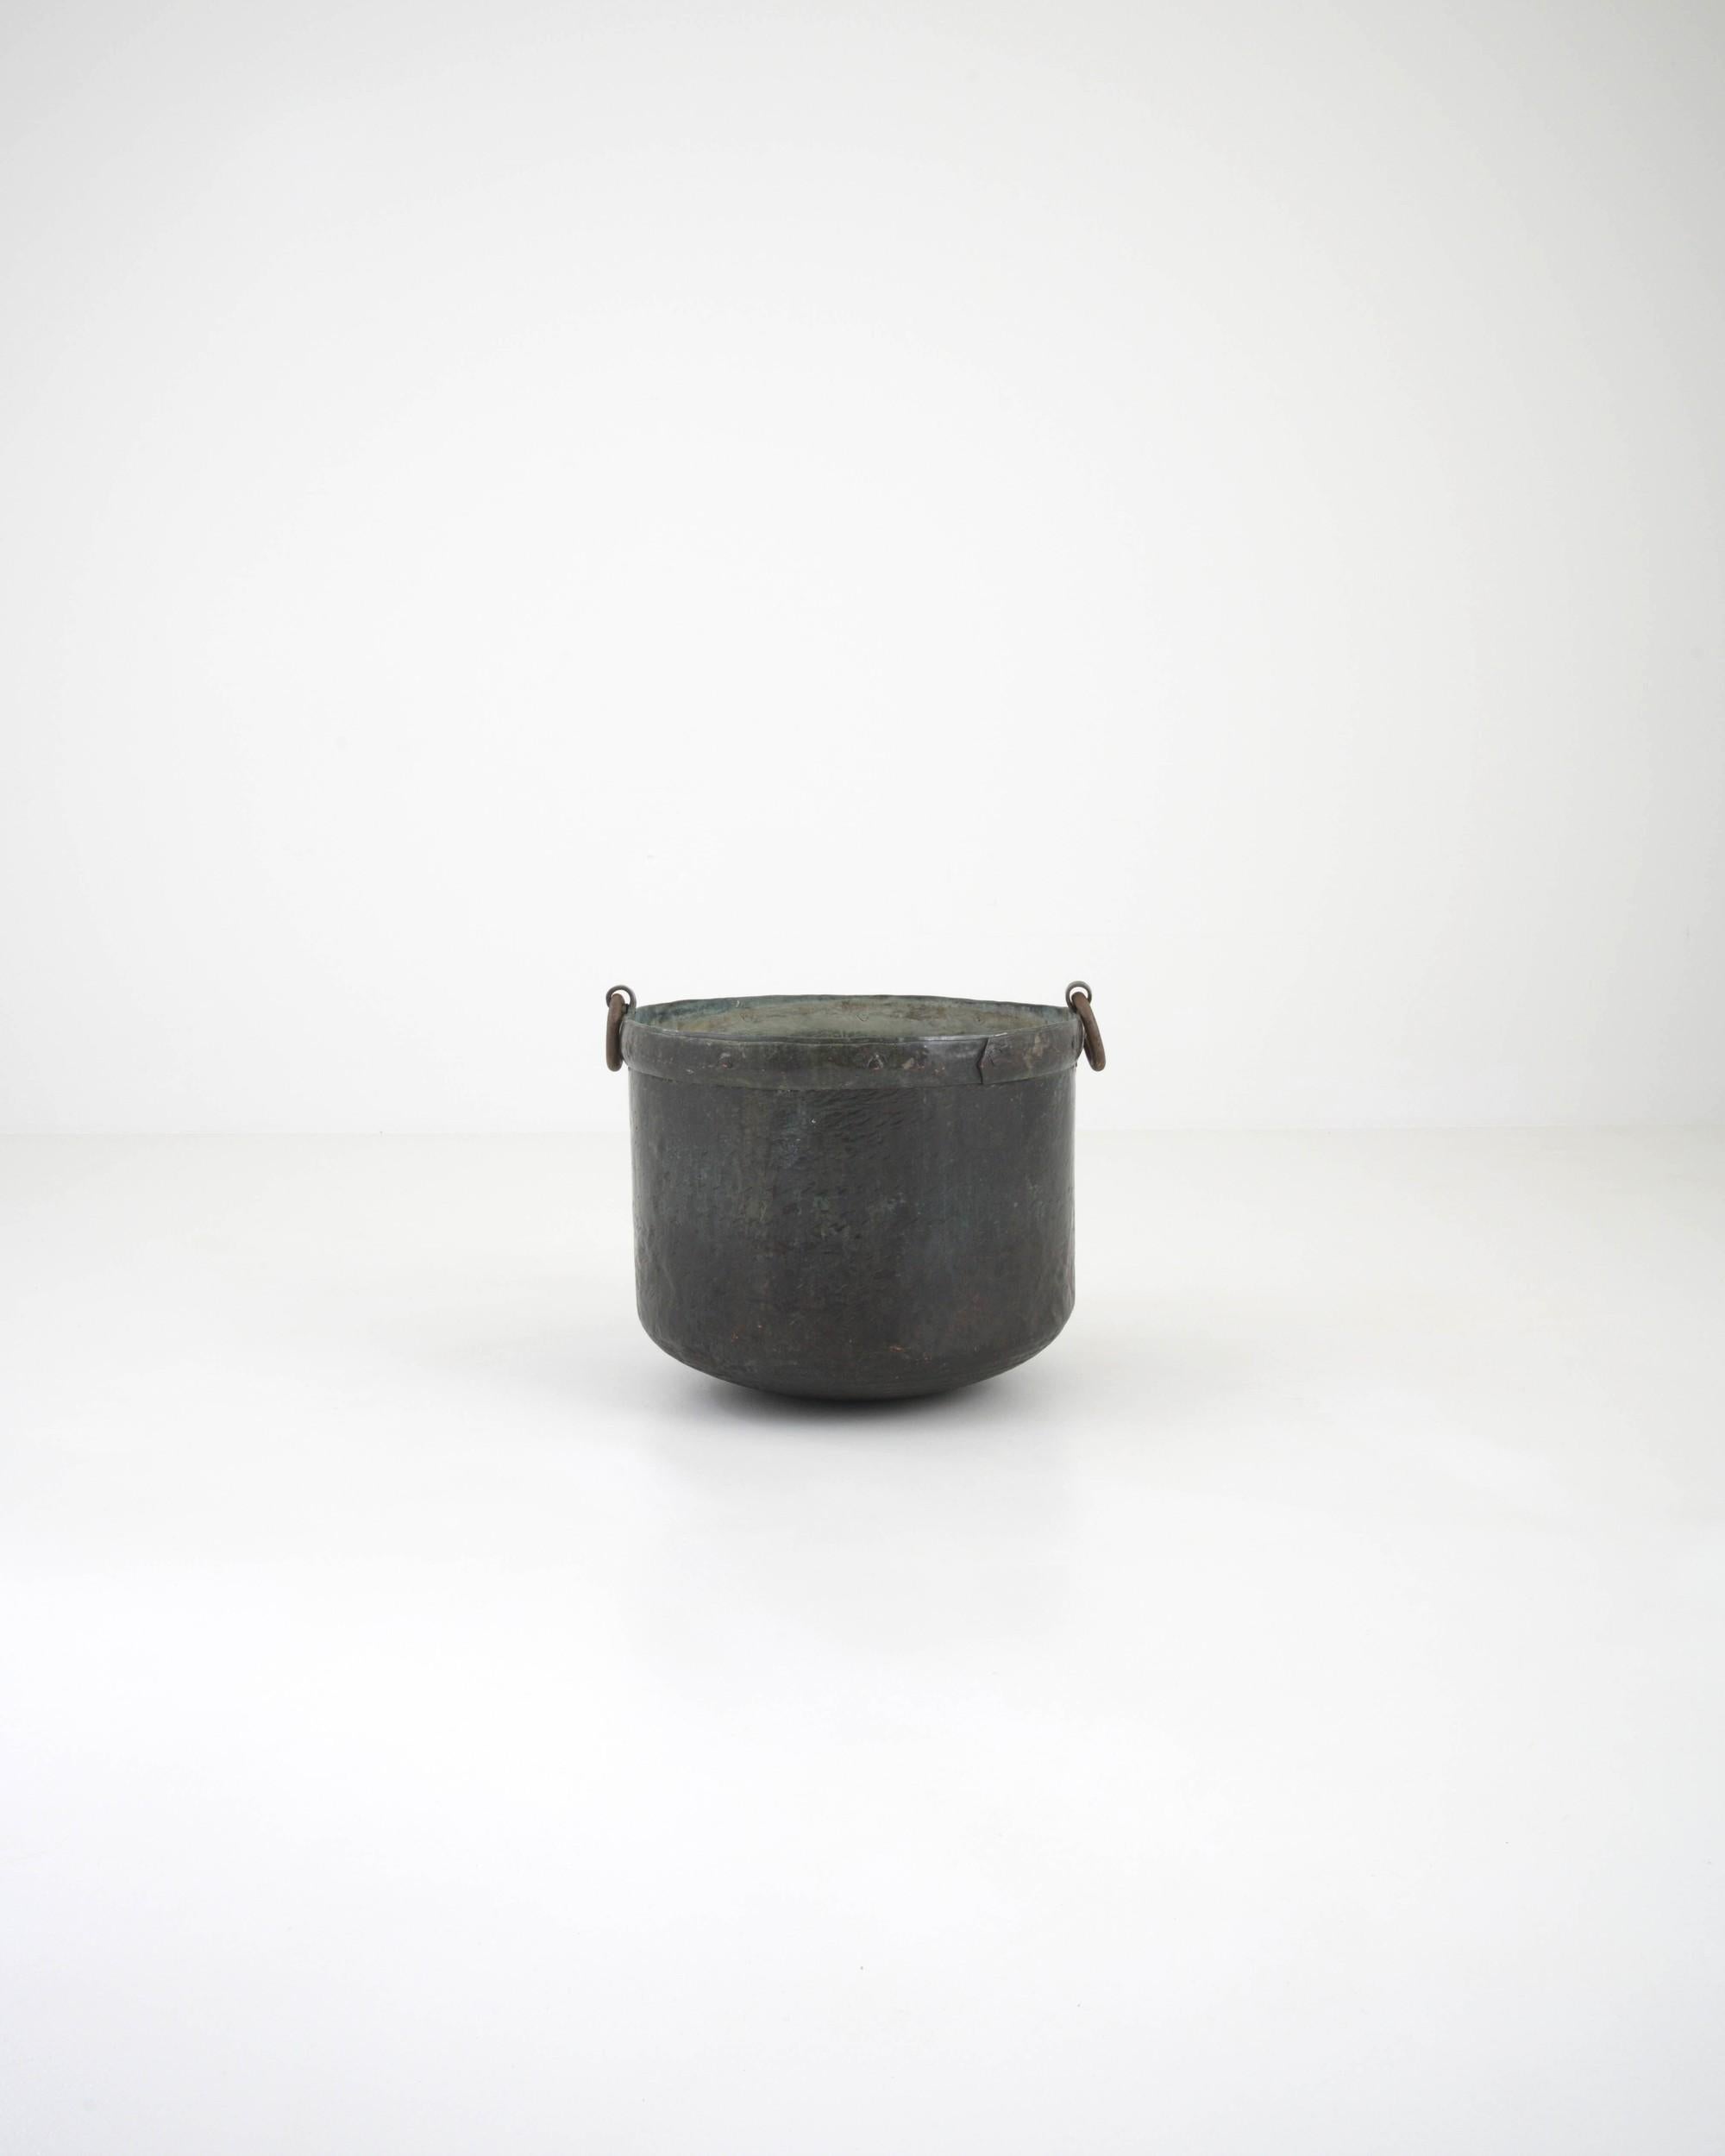 A metal pot from 19th Century France. Totally handmade, this pot features a beautiful oxidized patina layering the original polished finish. These artisanally crafted pots were made with care and detail, along with high quality materials produced